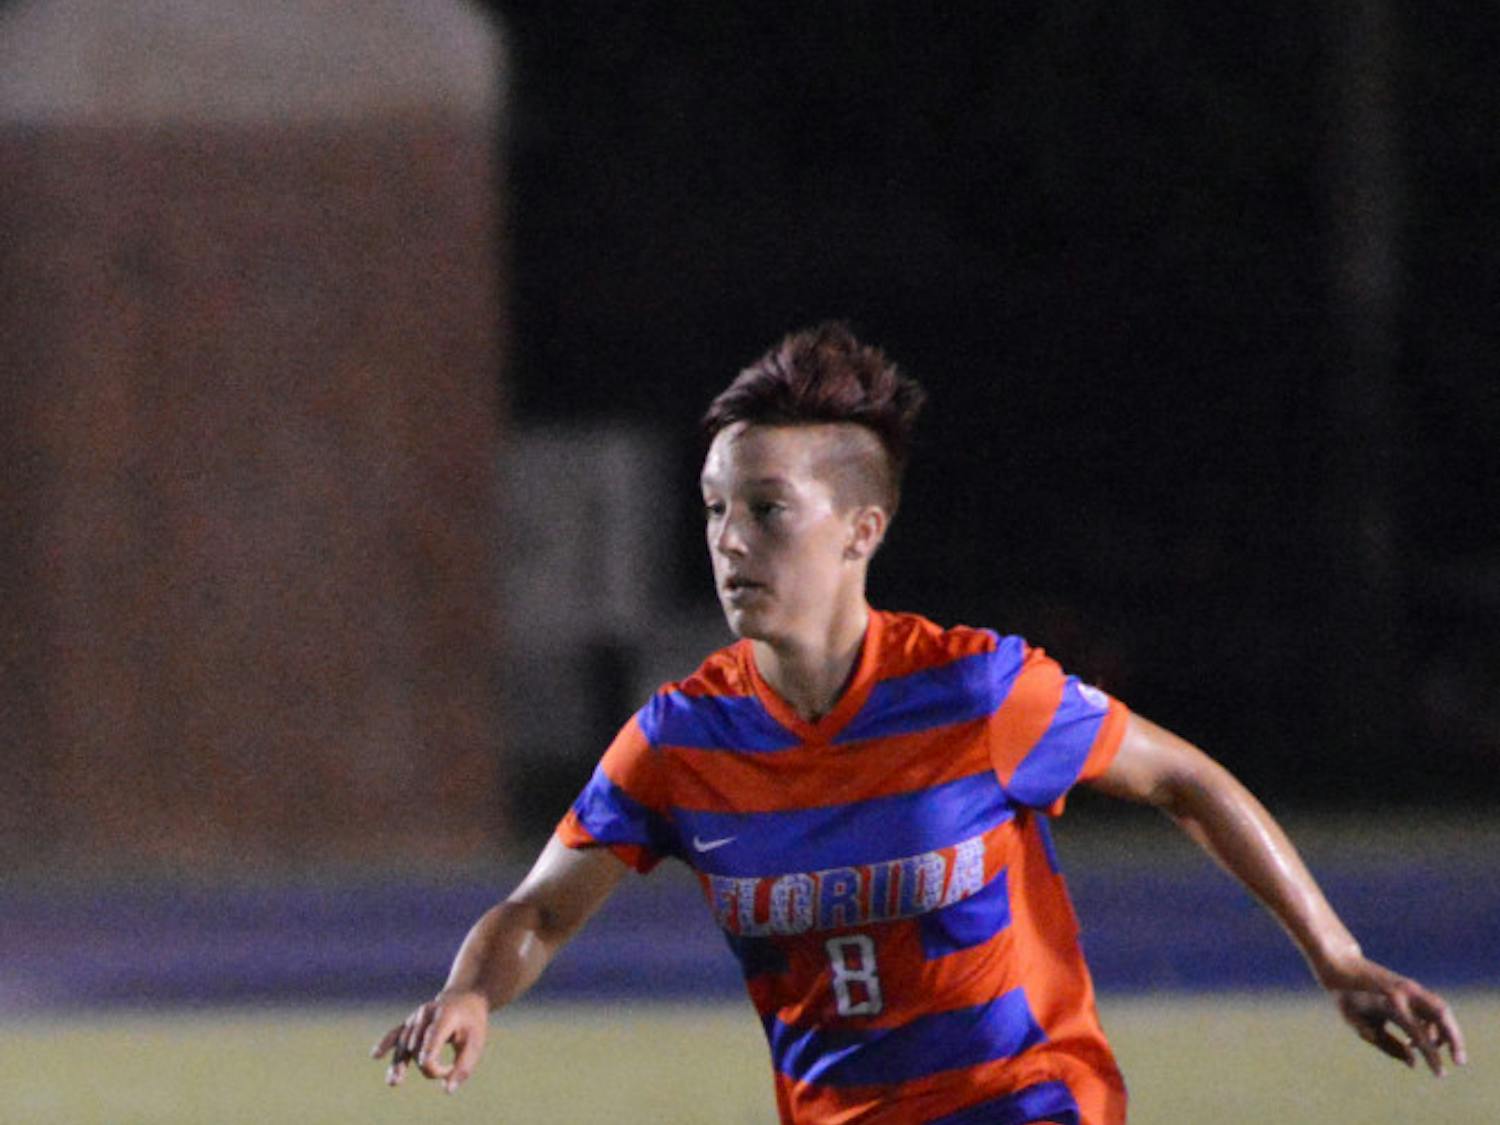 Junior defender Claire Falknor dribbles the ball during Florida's 3-0 win against Miami at James G. Pressly Stadium.